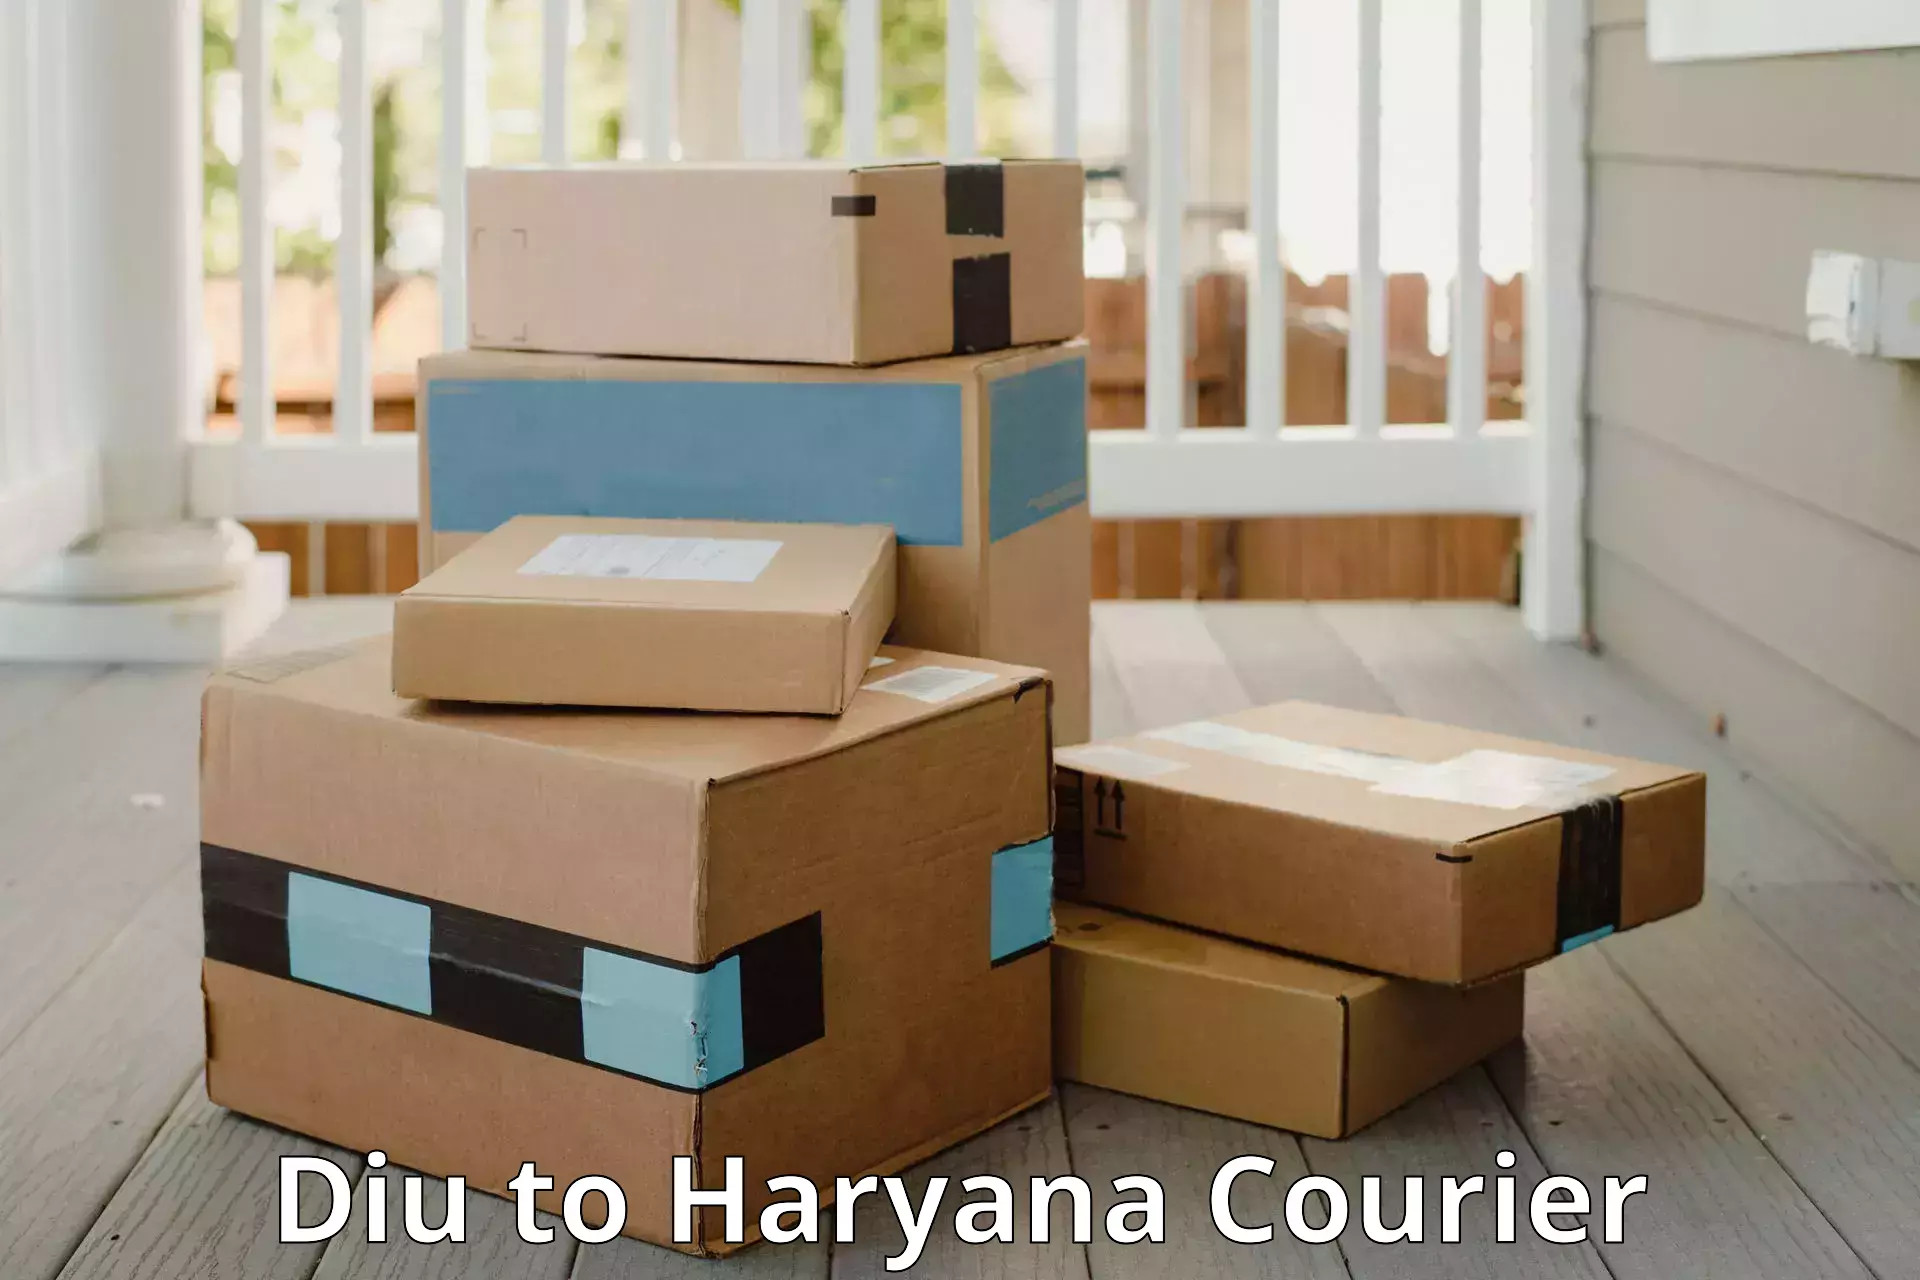 Luggage delivery app Diu to Haryana